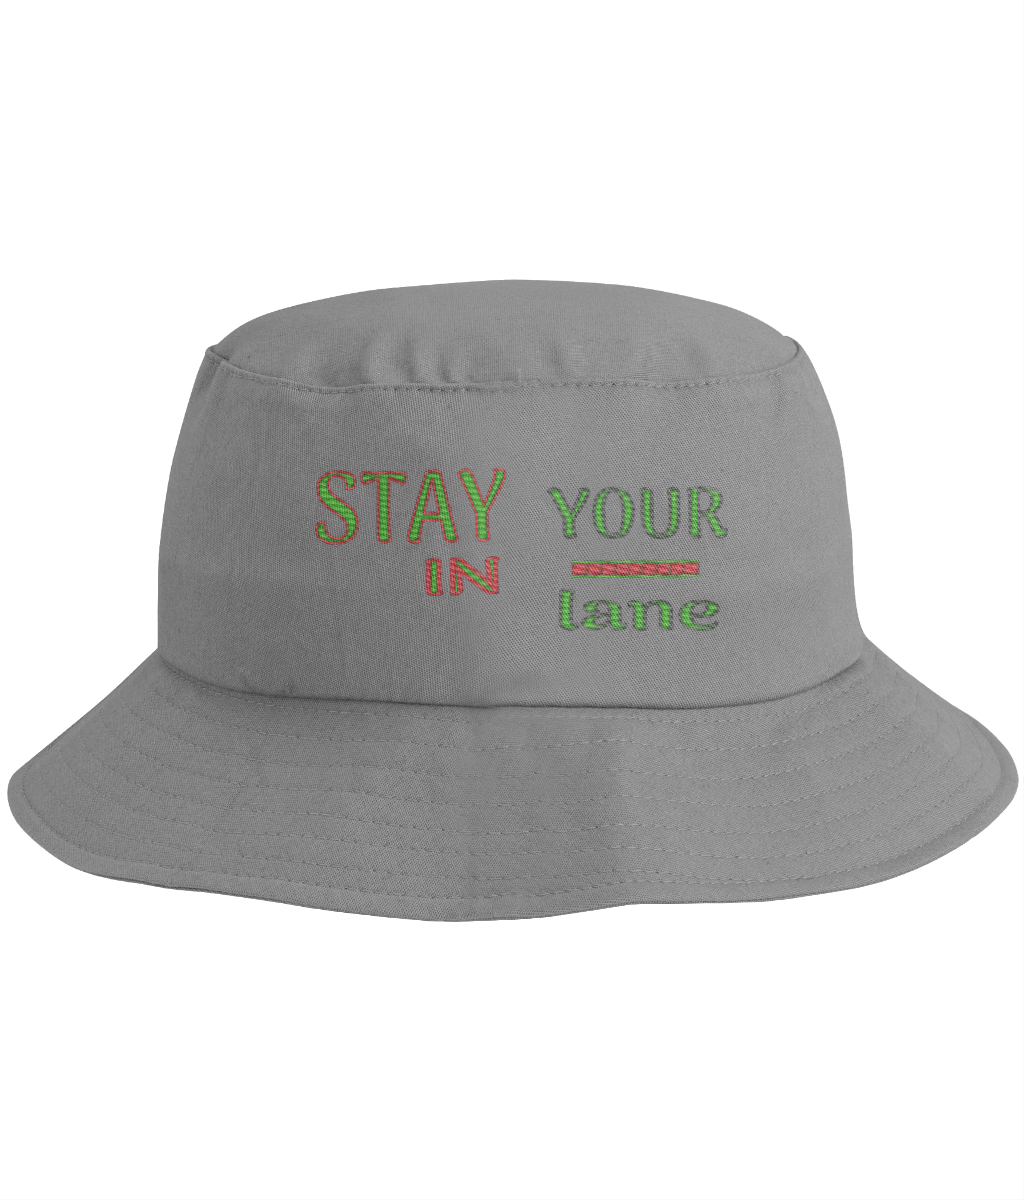 STAY IN YOUR lane 01-01 Designer Unisex Embroidered Cotton Twill Bucket Hat (6 Colors)